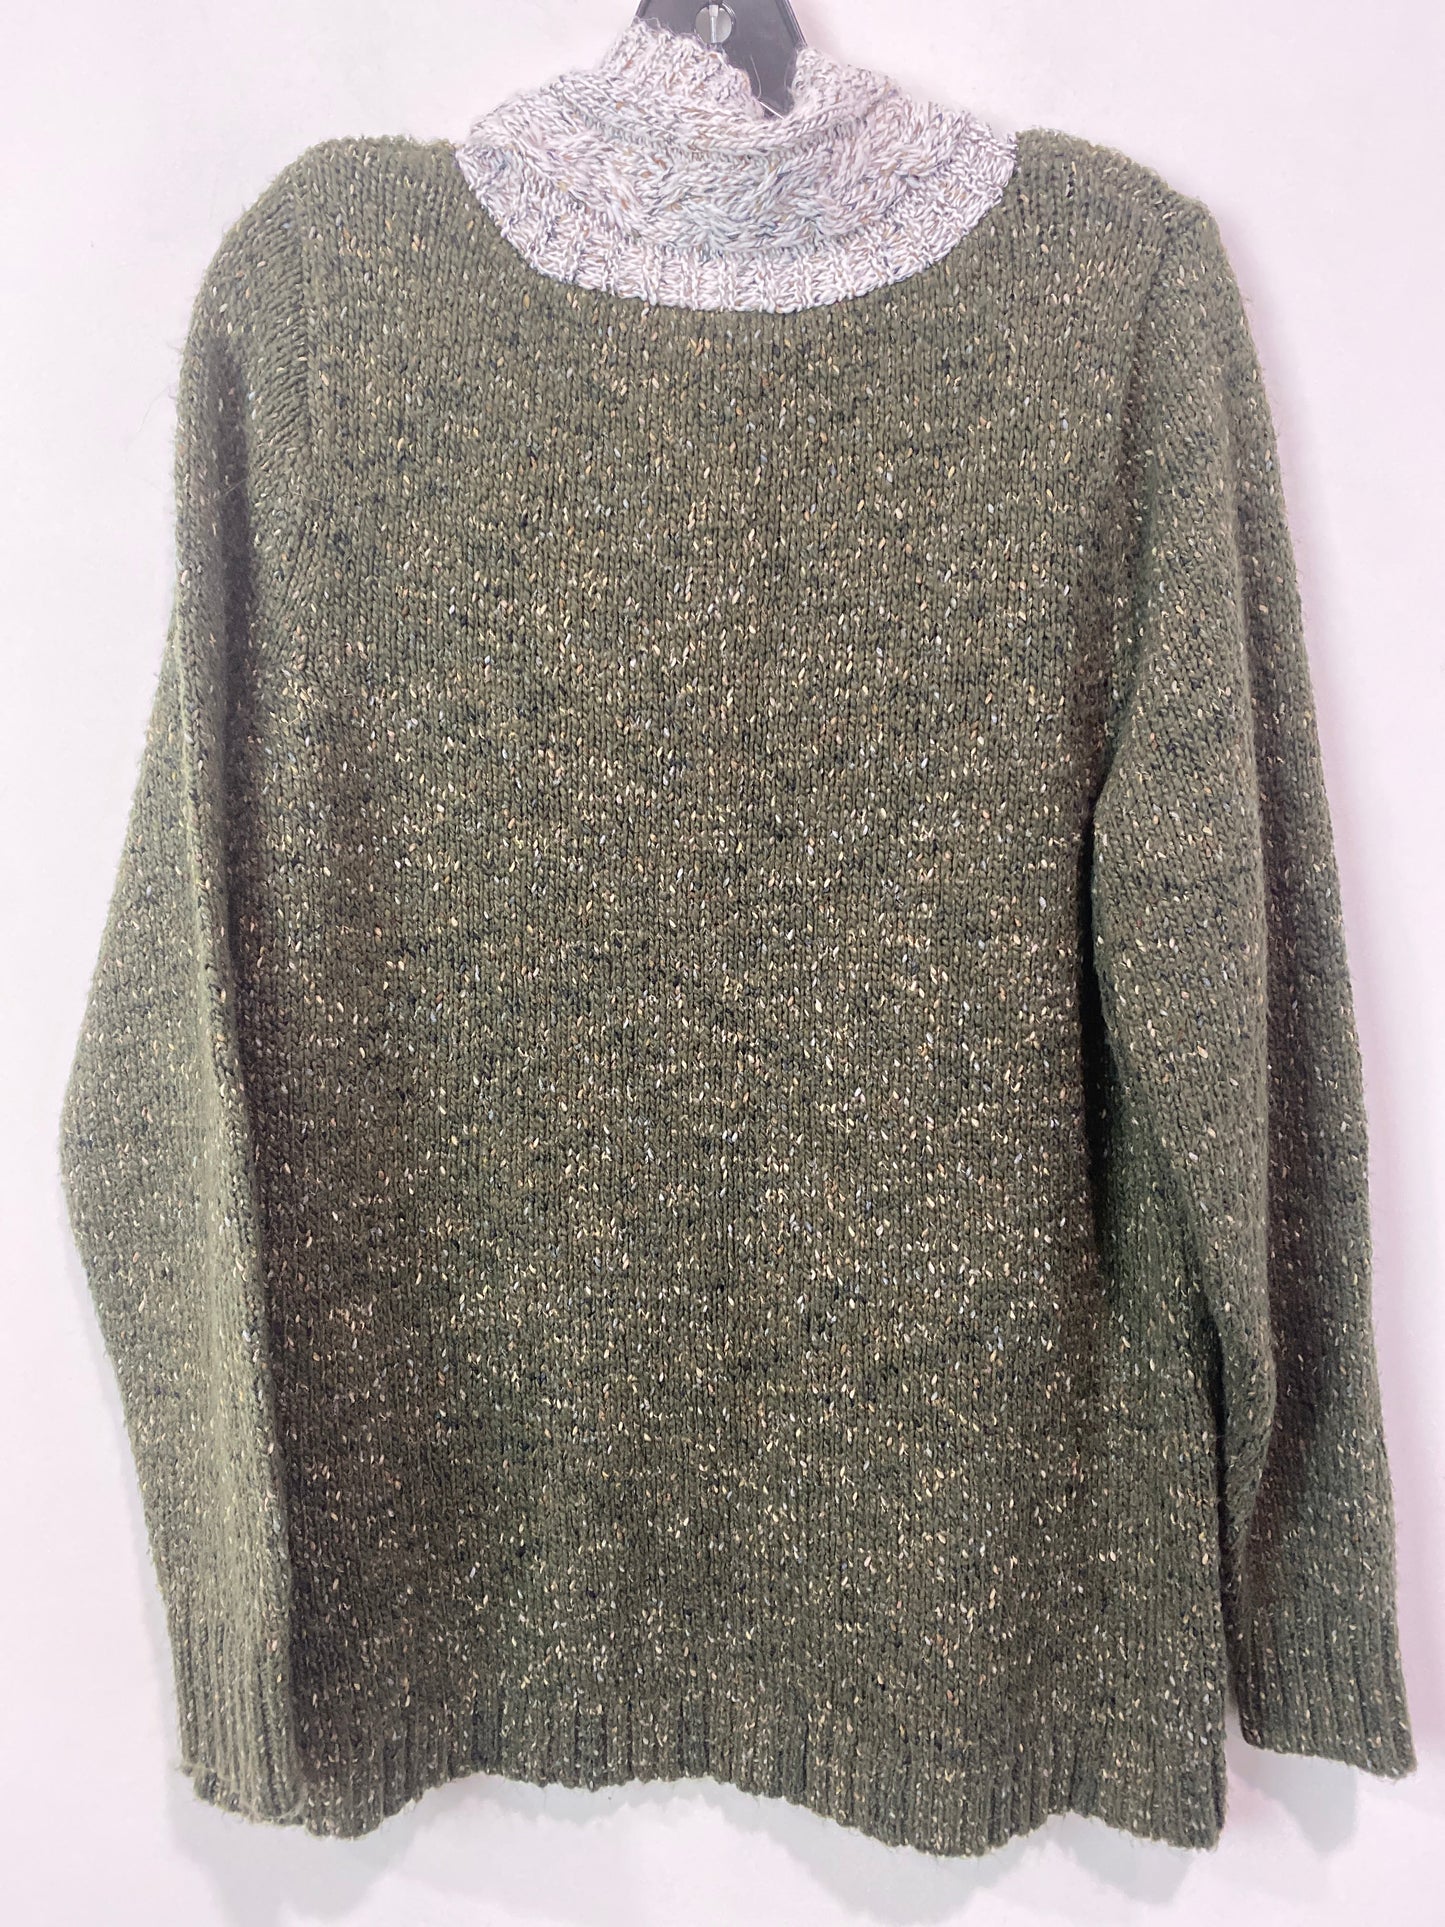 Green Sweater Cato, Size 1x